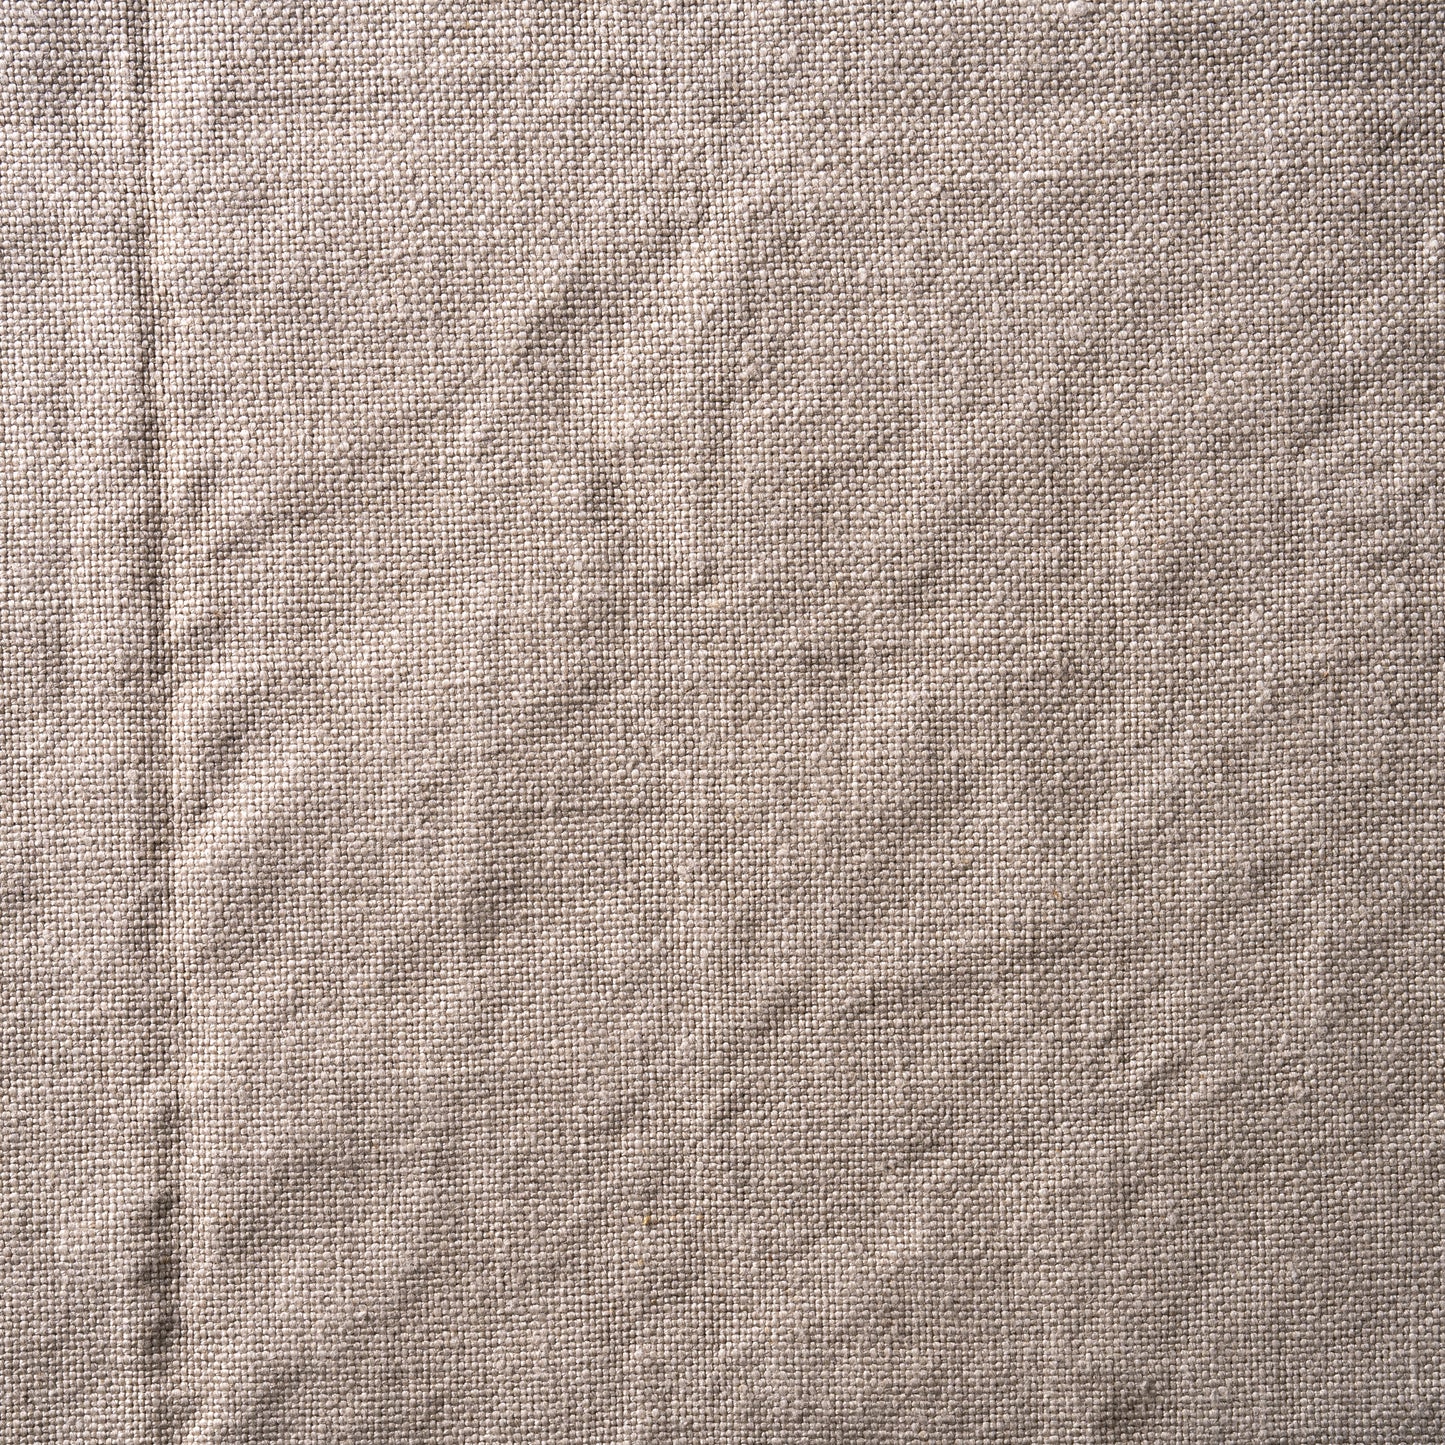 11 oz/sq yard 100% Home Furnishing Weight Linen in Natural